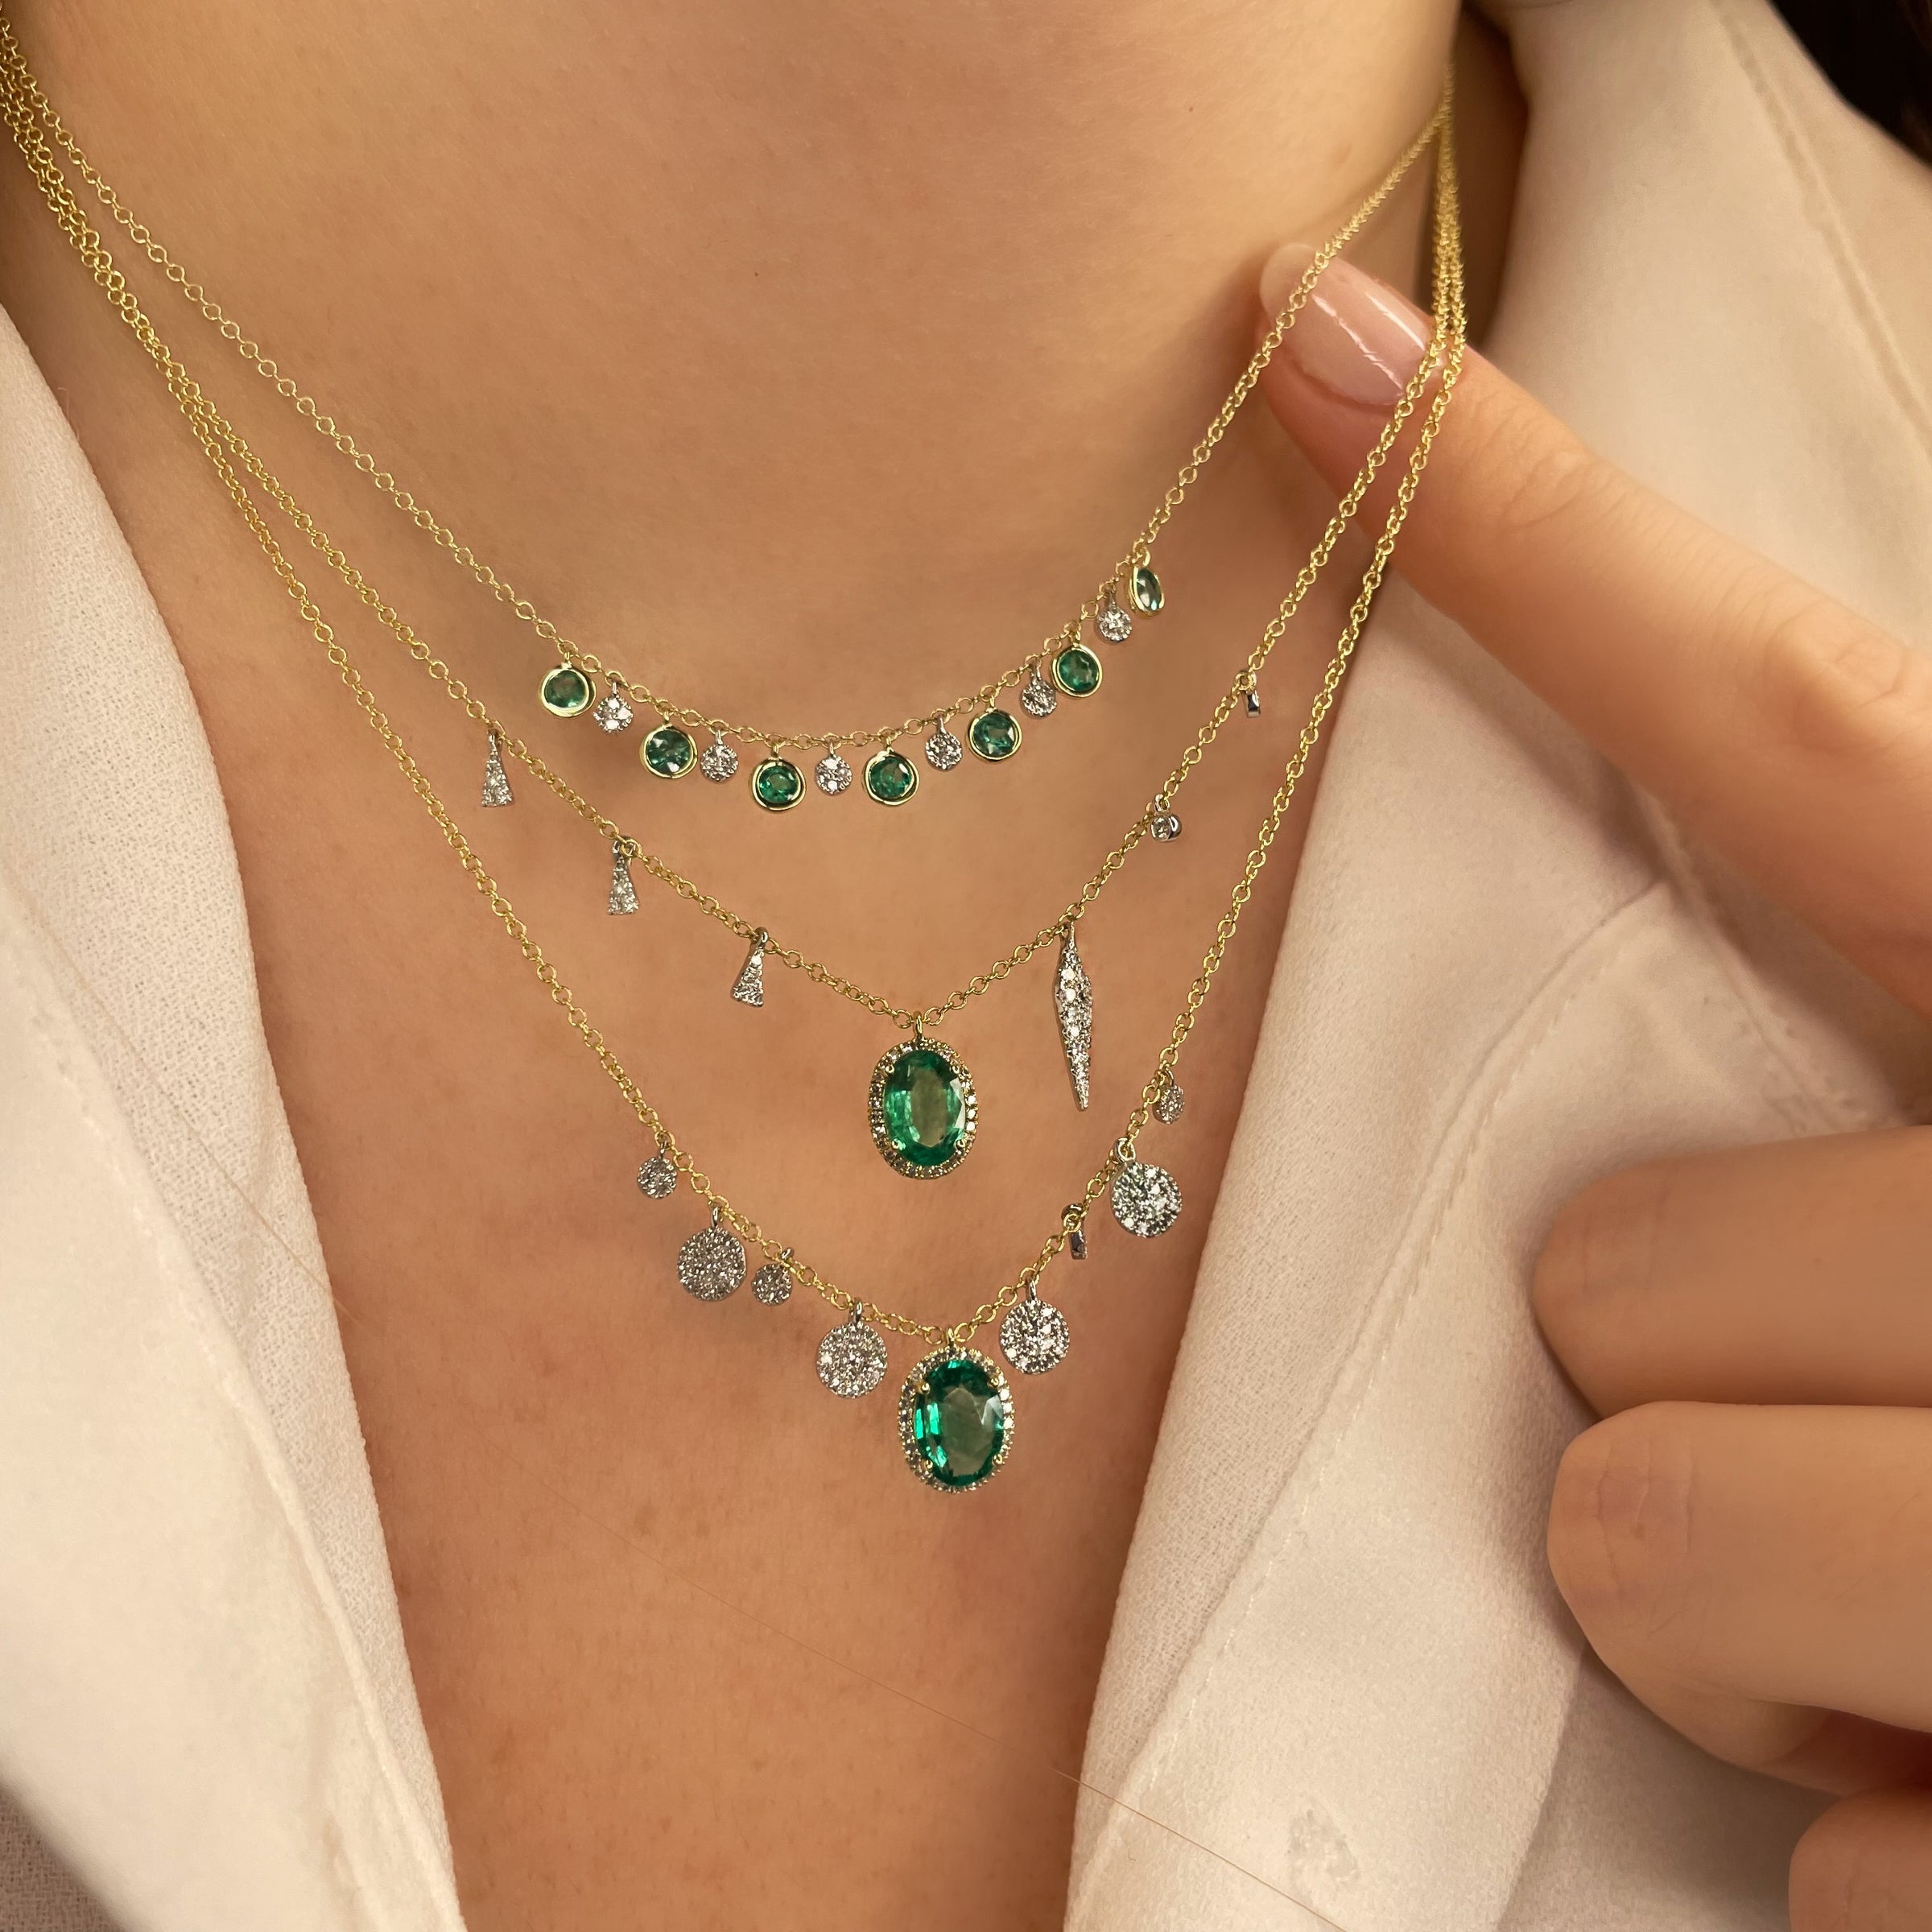 Emerald Necklace, 14K Gold Emerald Solitaire Necklace, 5mm Round Emerald  Necklace, May Birthstone, Green Emerald, Gift for Her, Gemstone